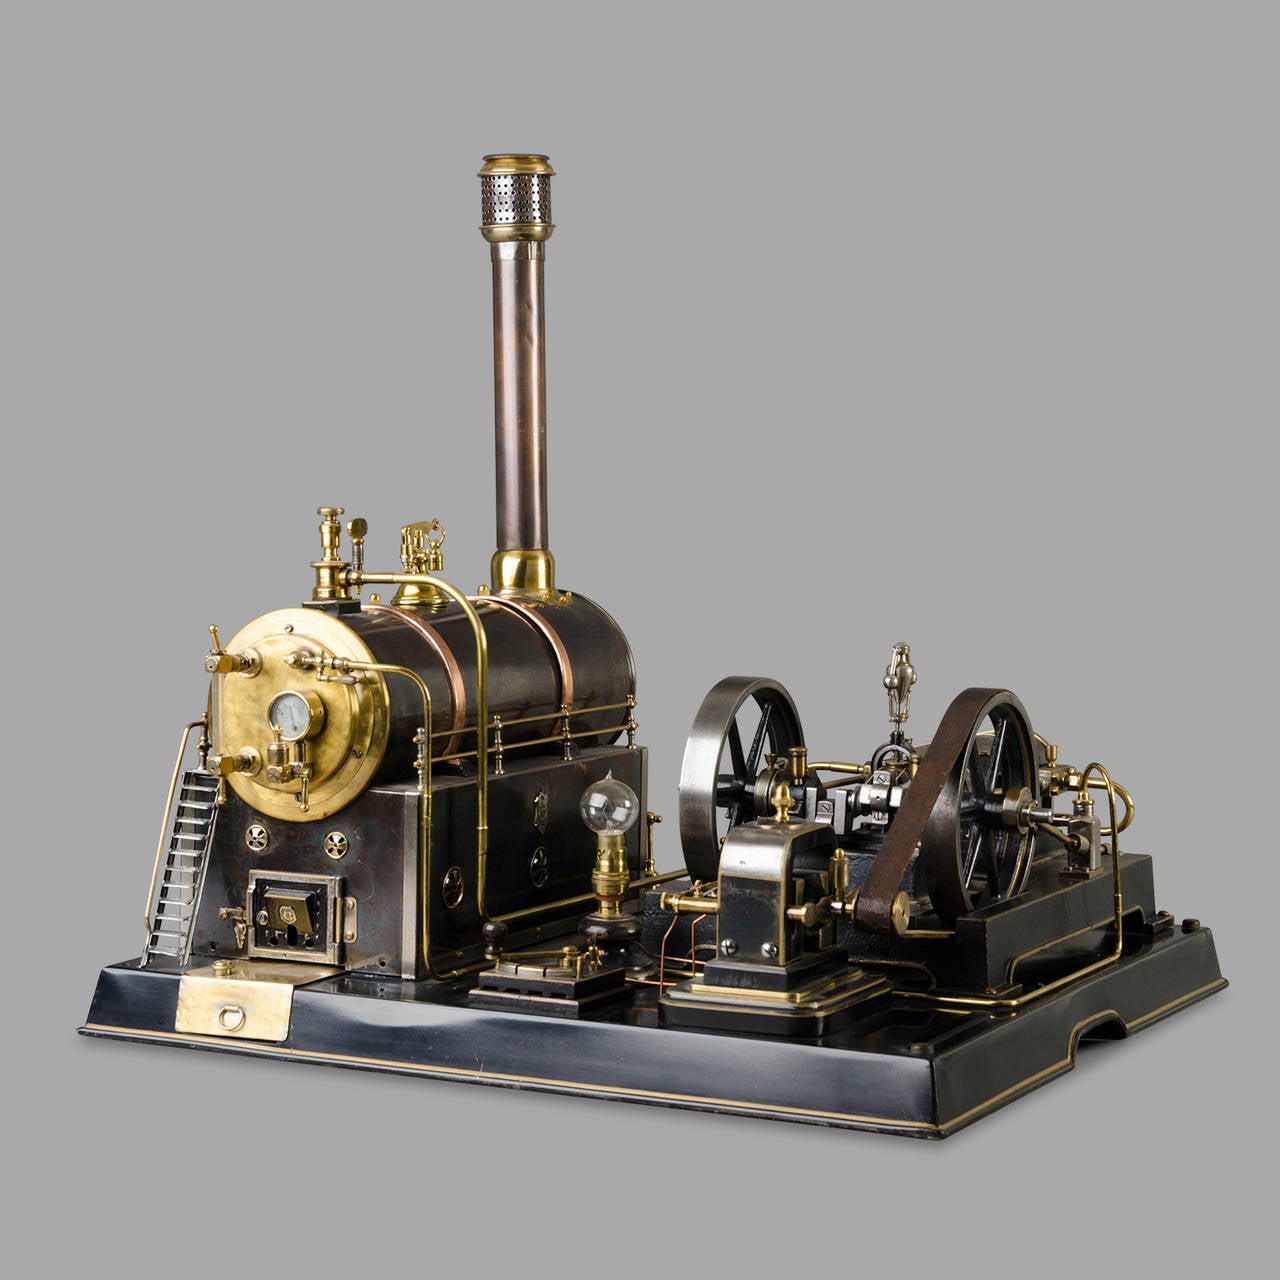 Outstanding steam engine toy manufactured by the German Märklin Company, 1890.

Cast iron, brass and blued steel. Undoubtedly the most beautiful toy built by this famous German firm. One of the few models of this quality currently known. Valve